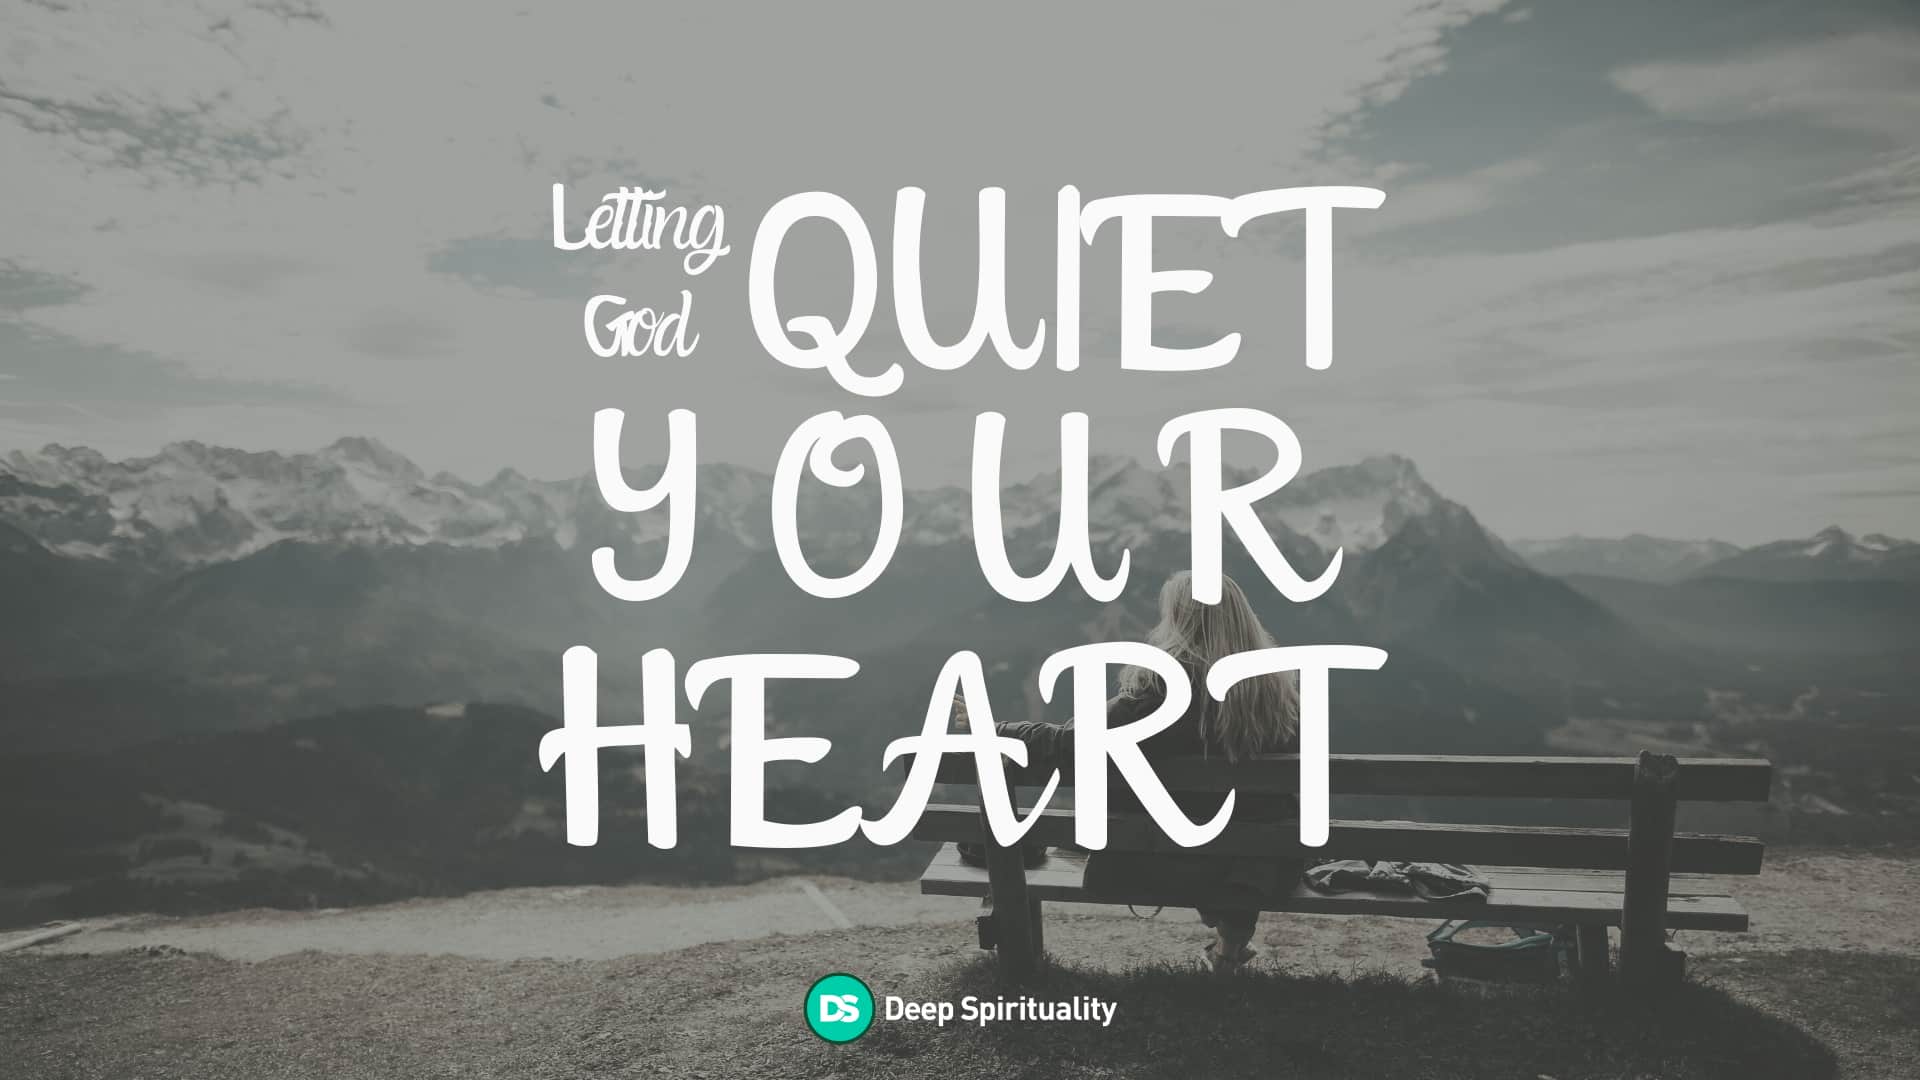 The Ultimate Guide to Letting God Quiet Your Heart 2